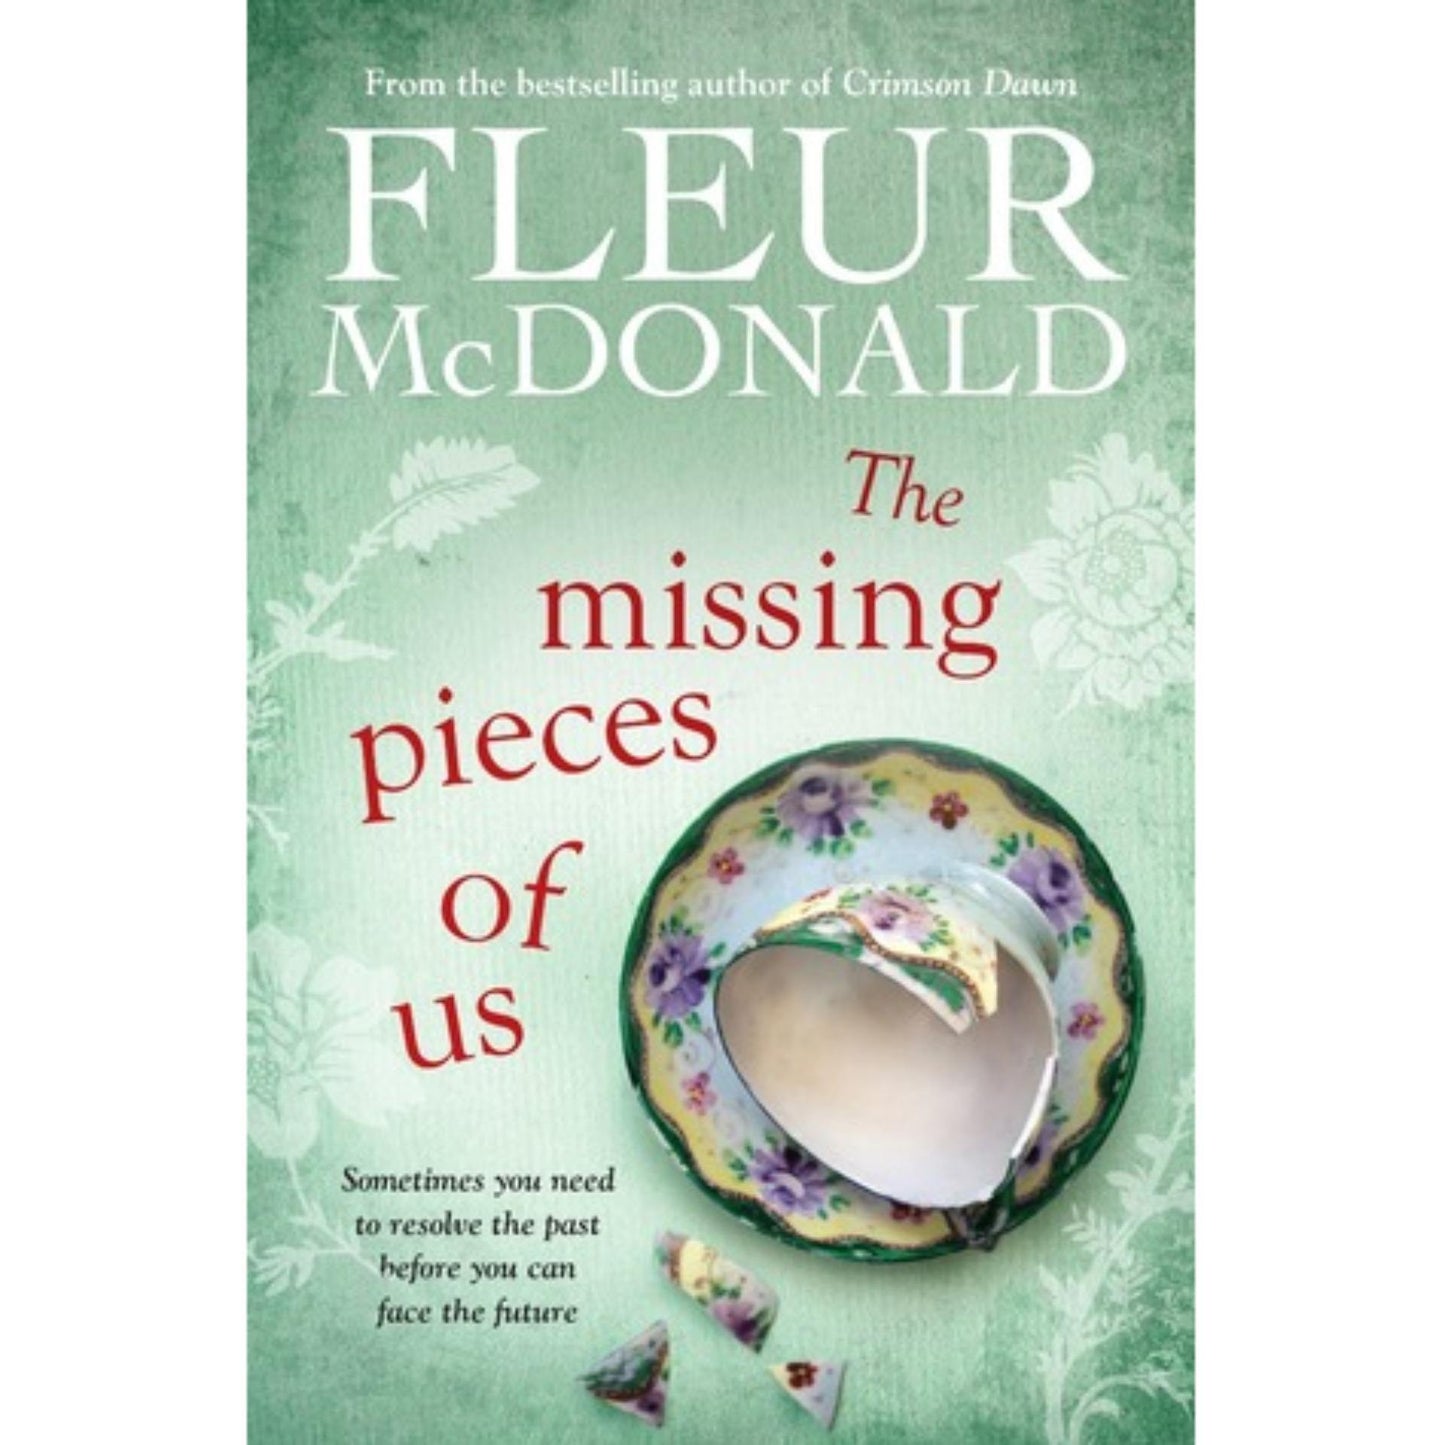 The Missing Pieces of Us by Fleur McDonald (Original) - Book A Book